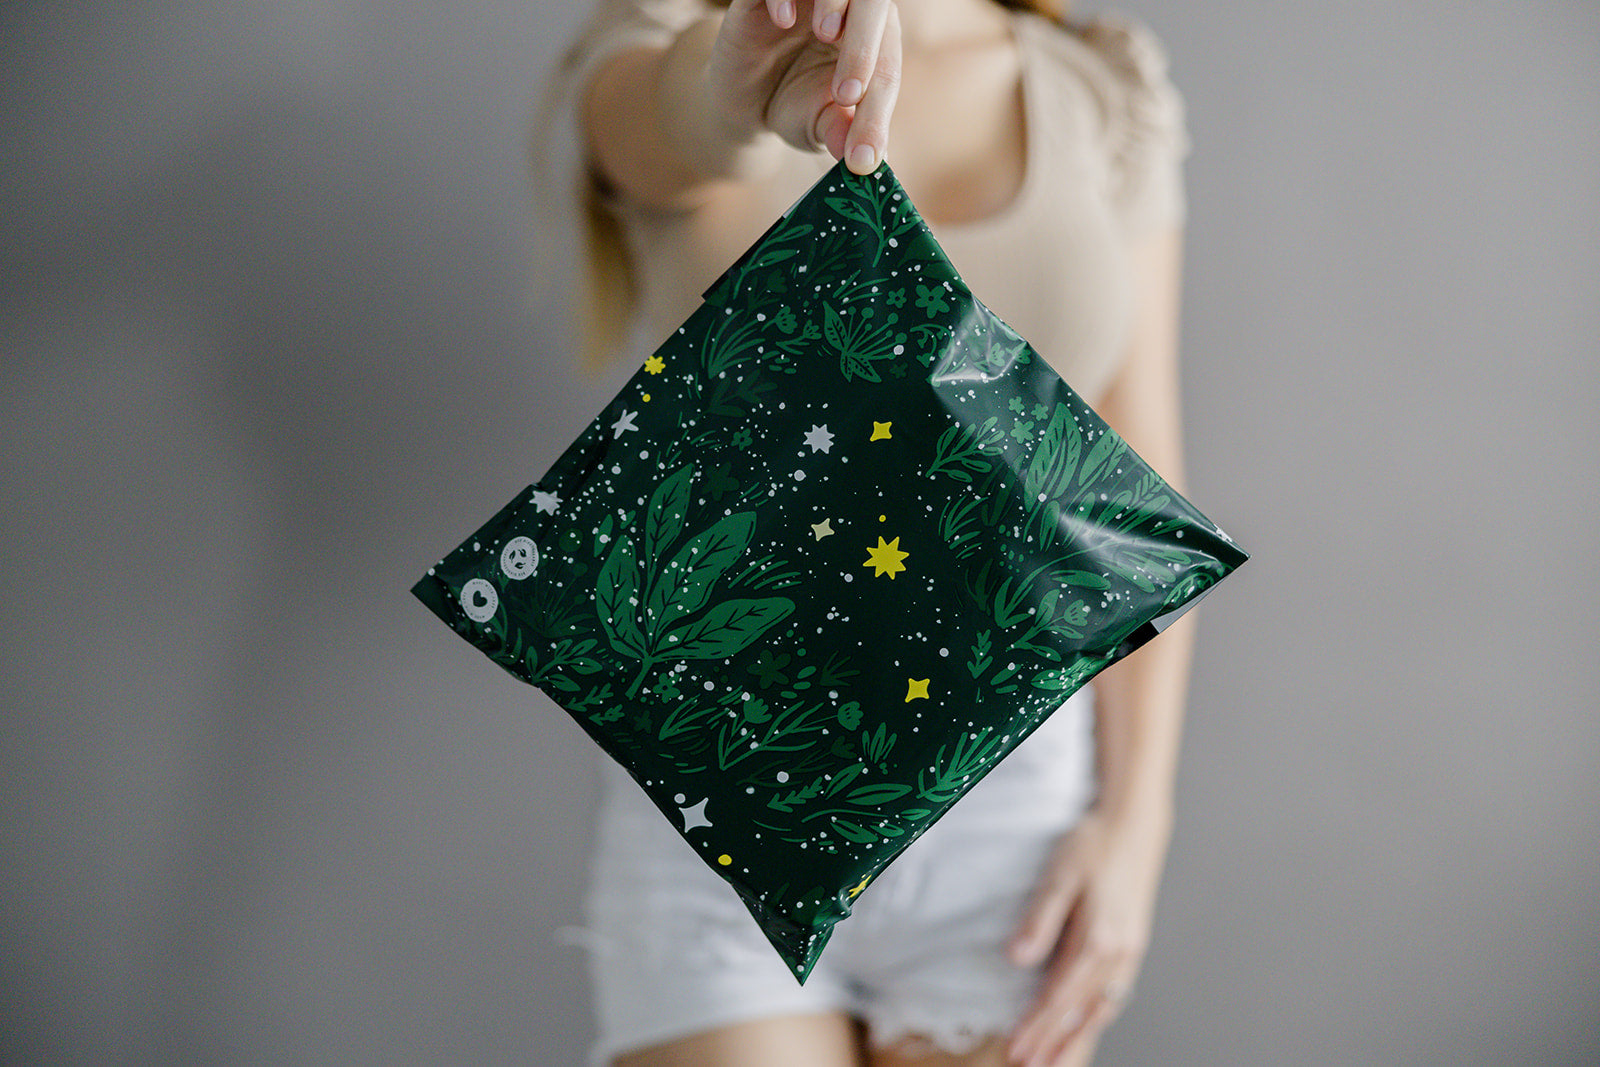 A woman is holding up a Midnight Lush Mailers 10" x 13" bag with stars on it made by impack.co.